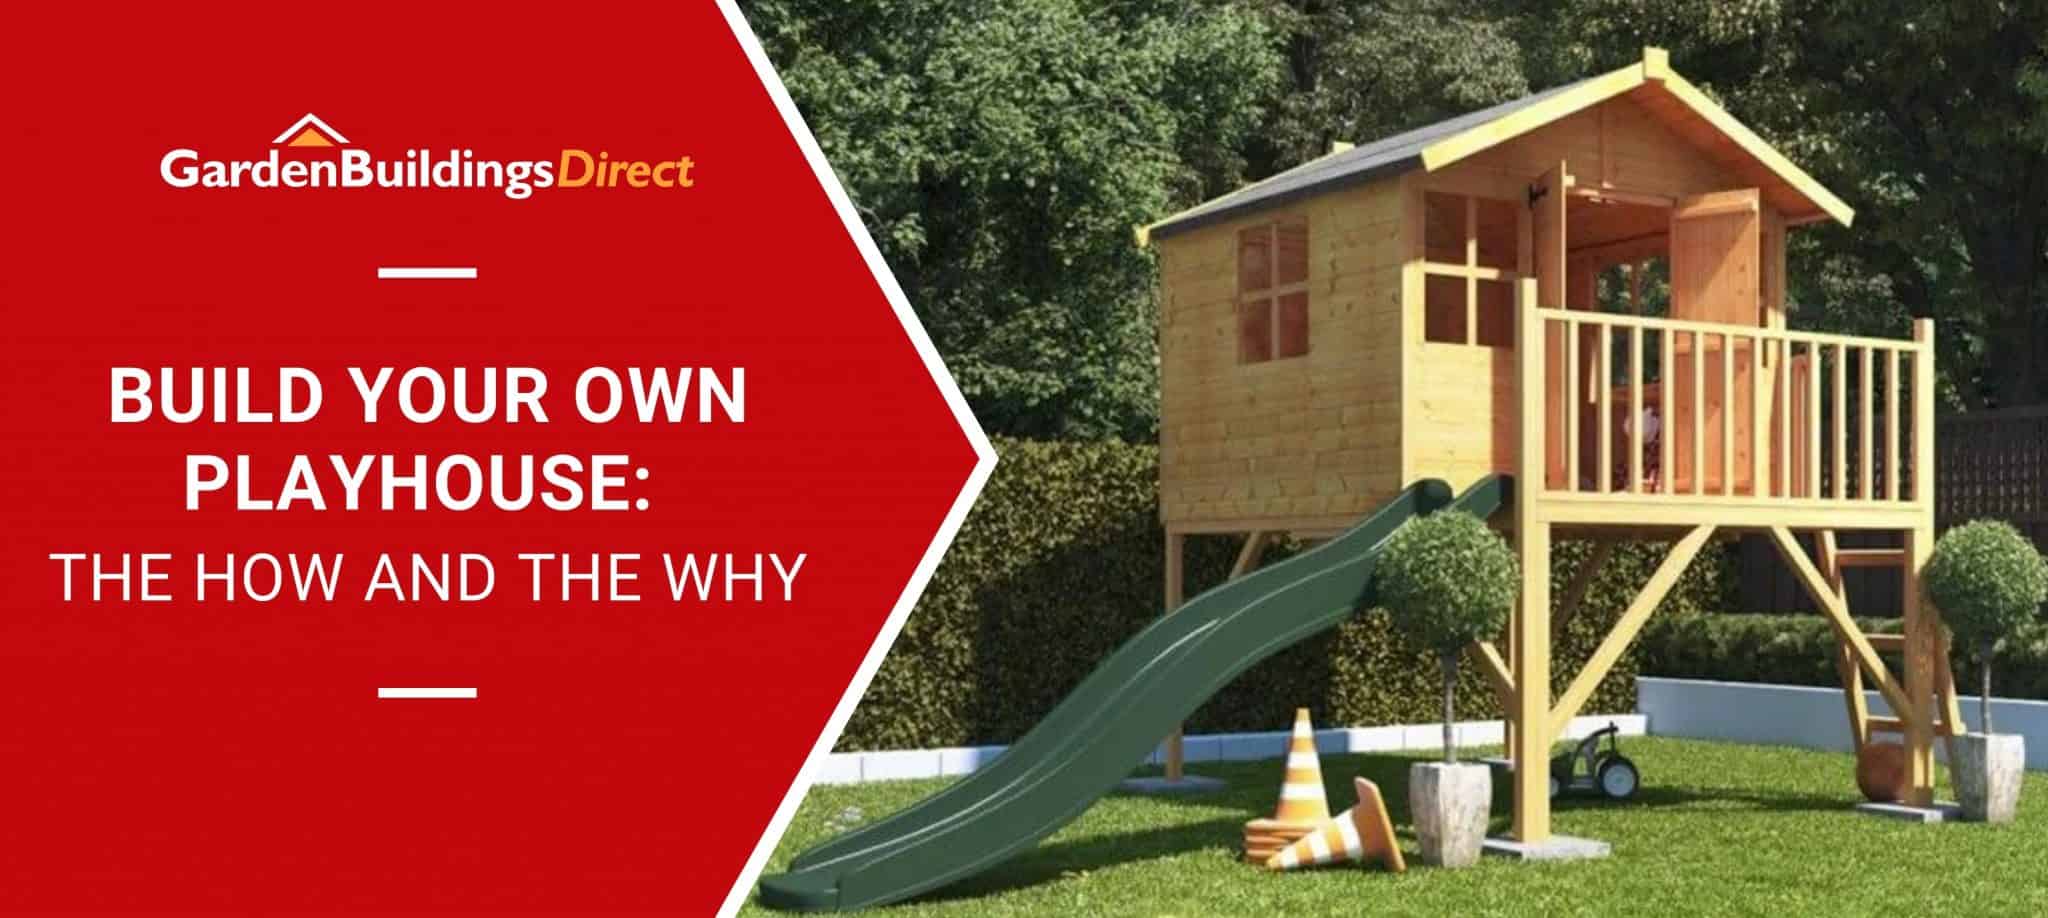 BillyOh Lollipop Junior Tower Playhouse with slide with 'Build Your Own Playhouse' banner on red arrow with Garden Buildings Direct Logo